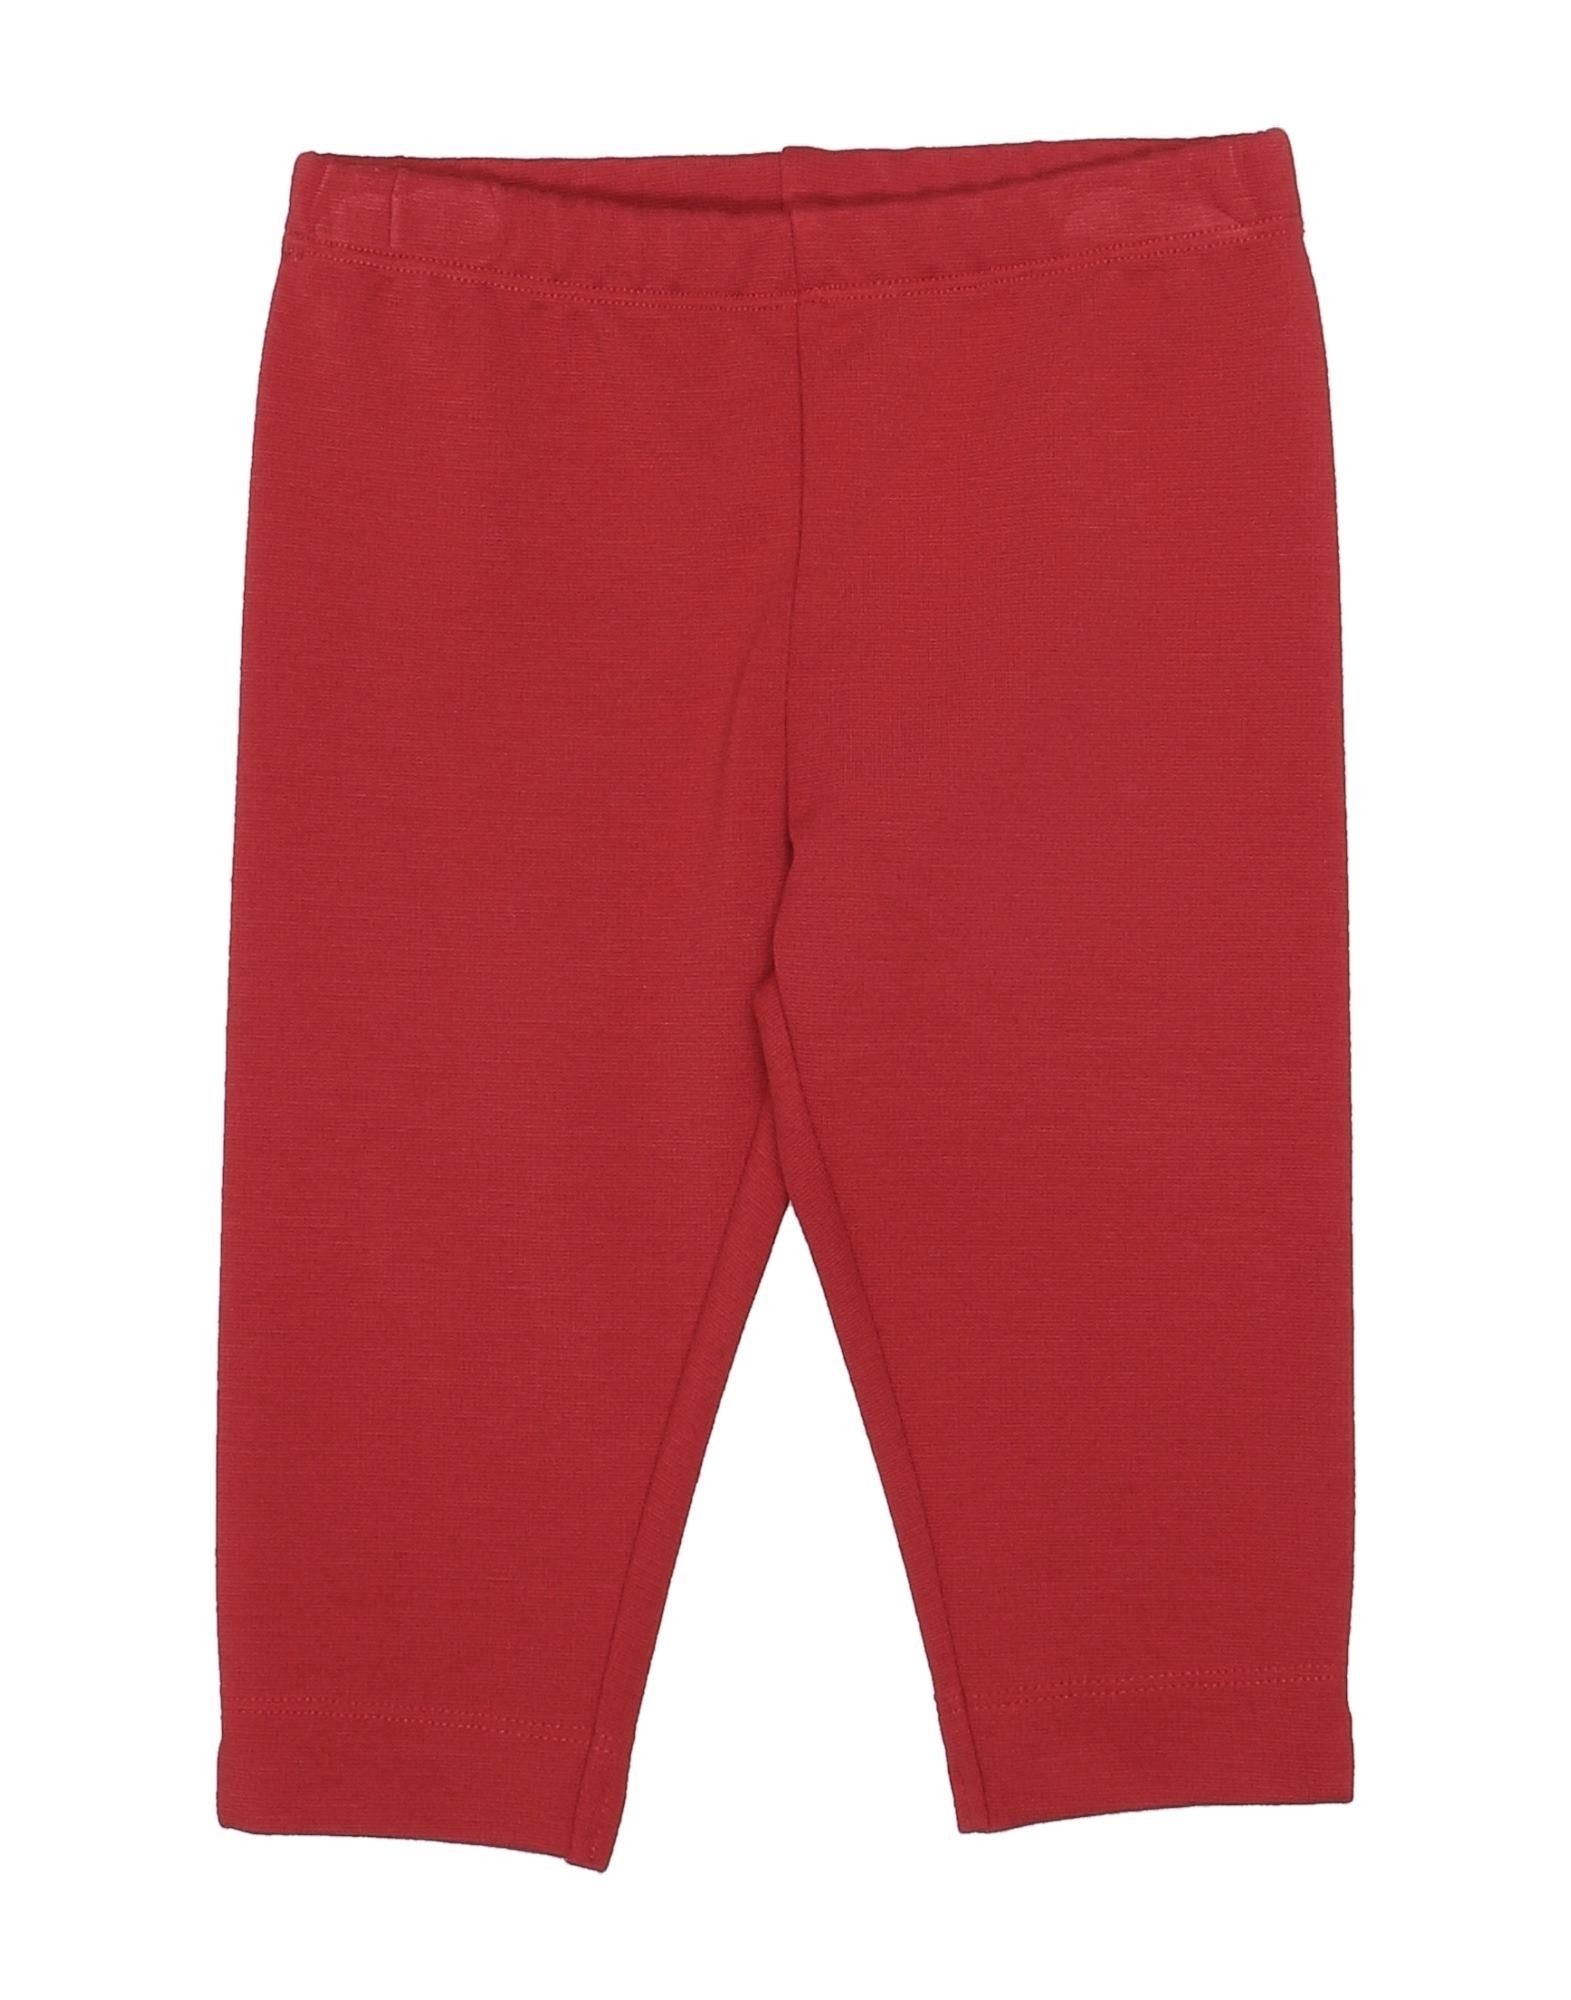 SPECIAL DAY Leggings Kinder Rot von SPECIAL DAY